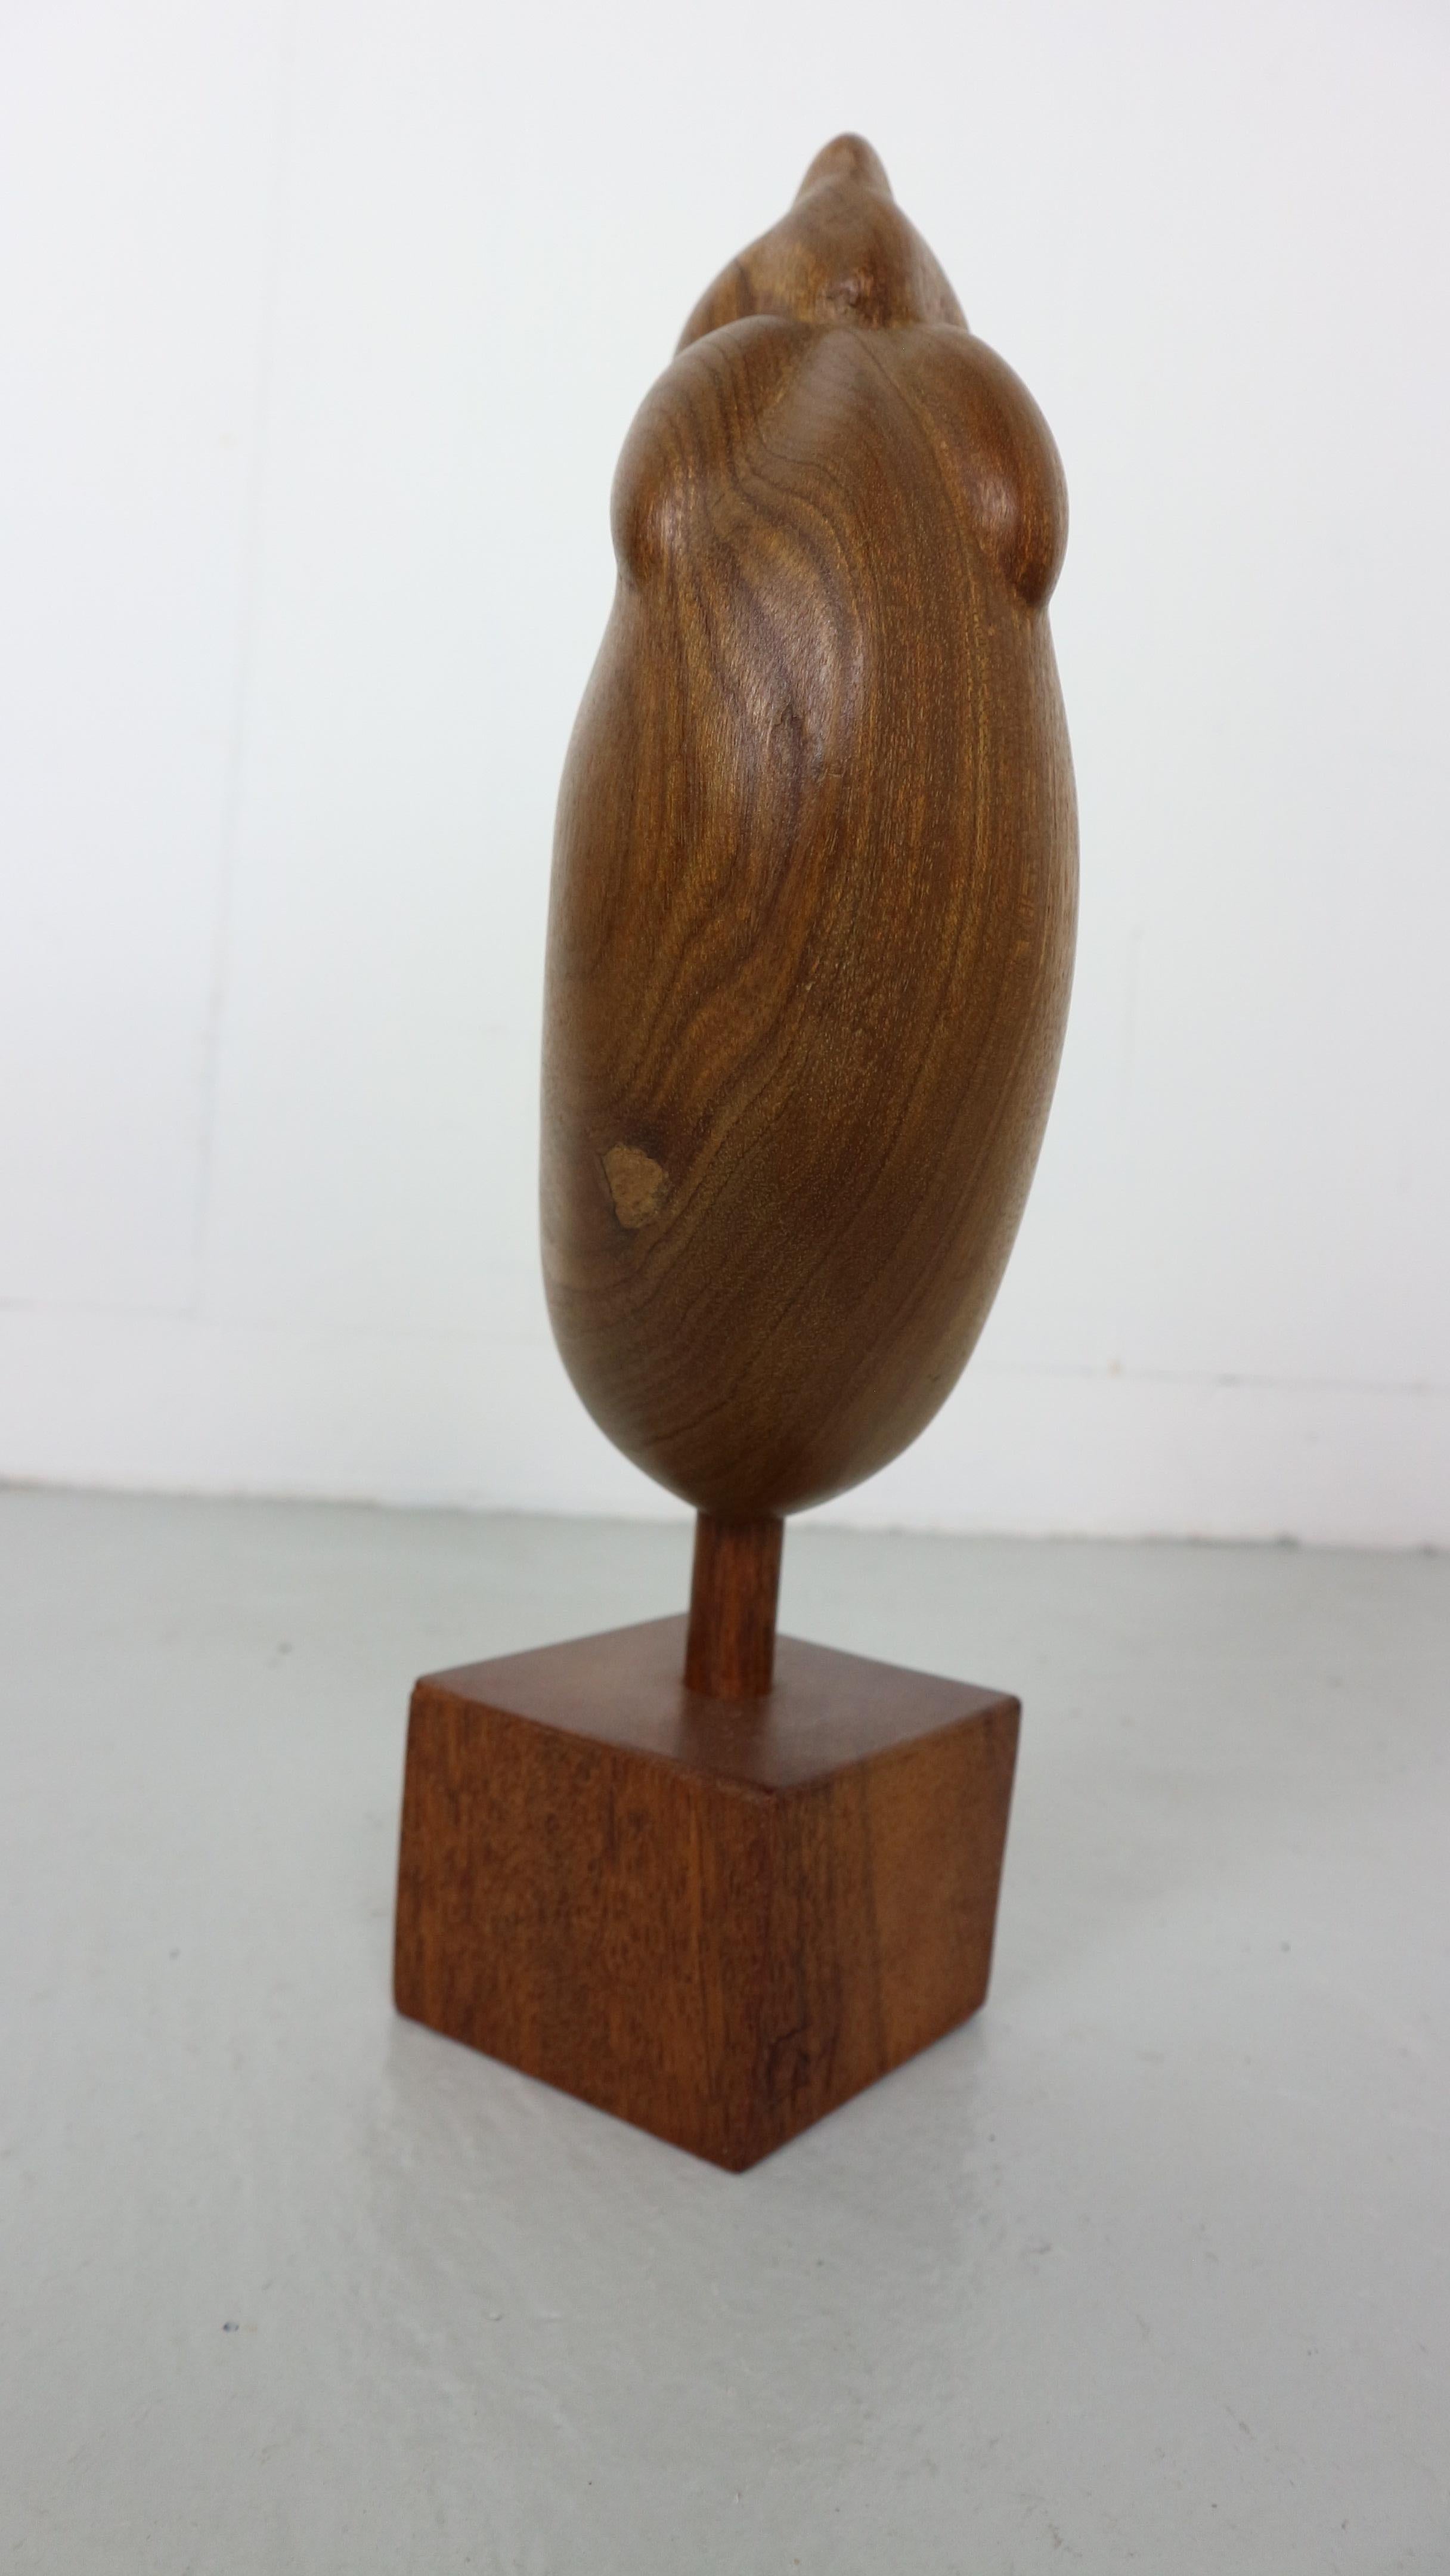 Mid-Century Modern organically shaped wood sculpture 1950s Netherlands, Rooster